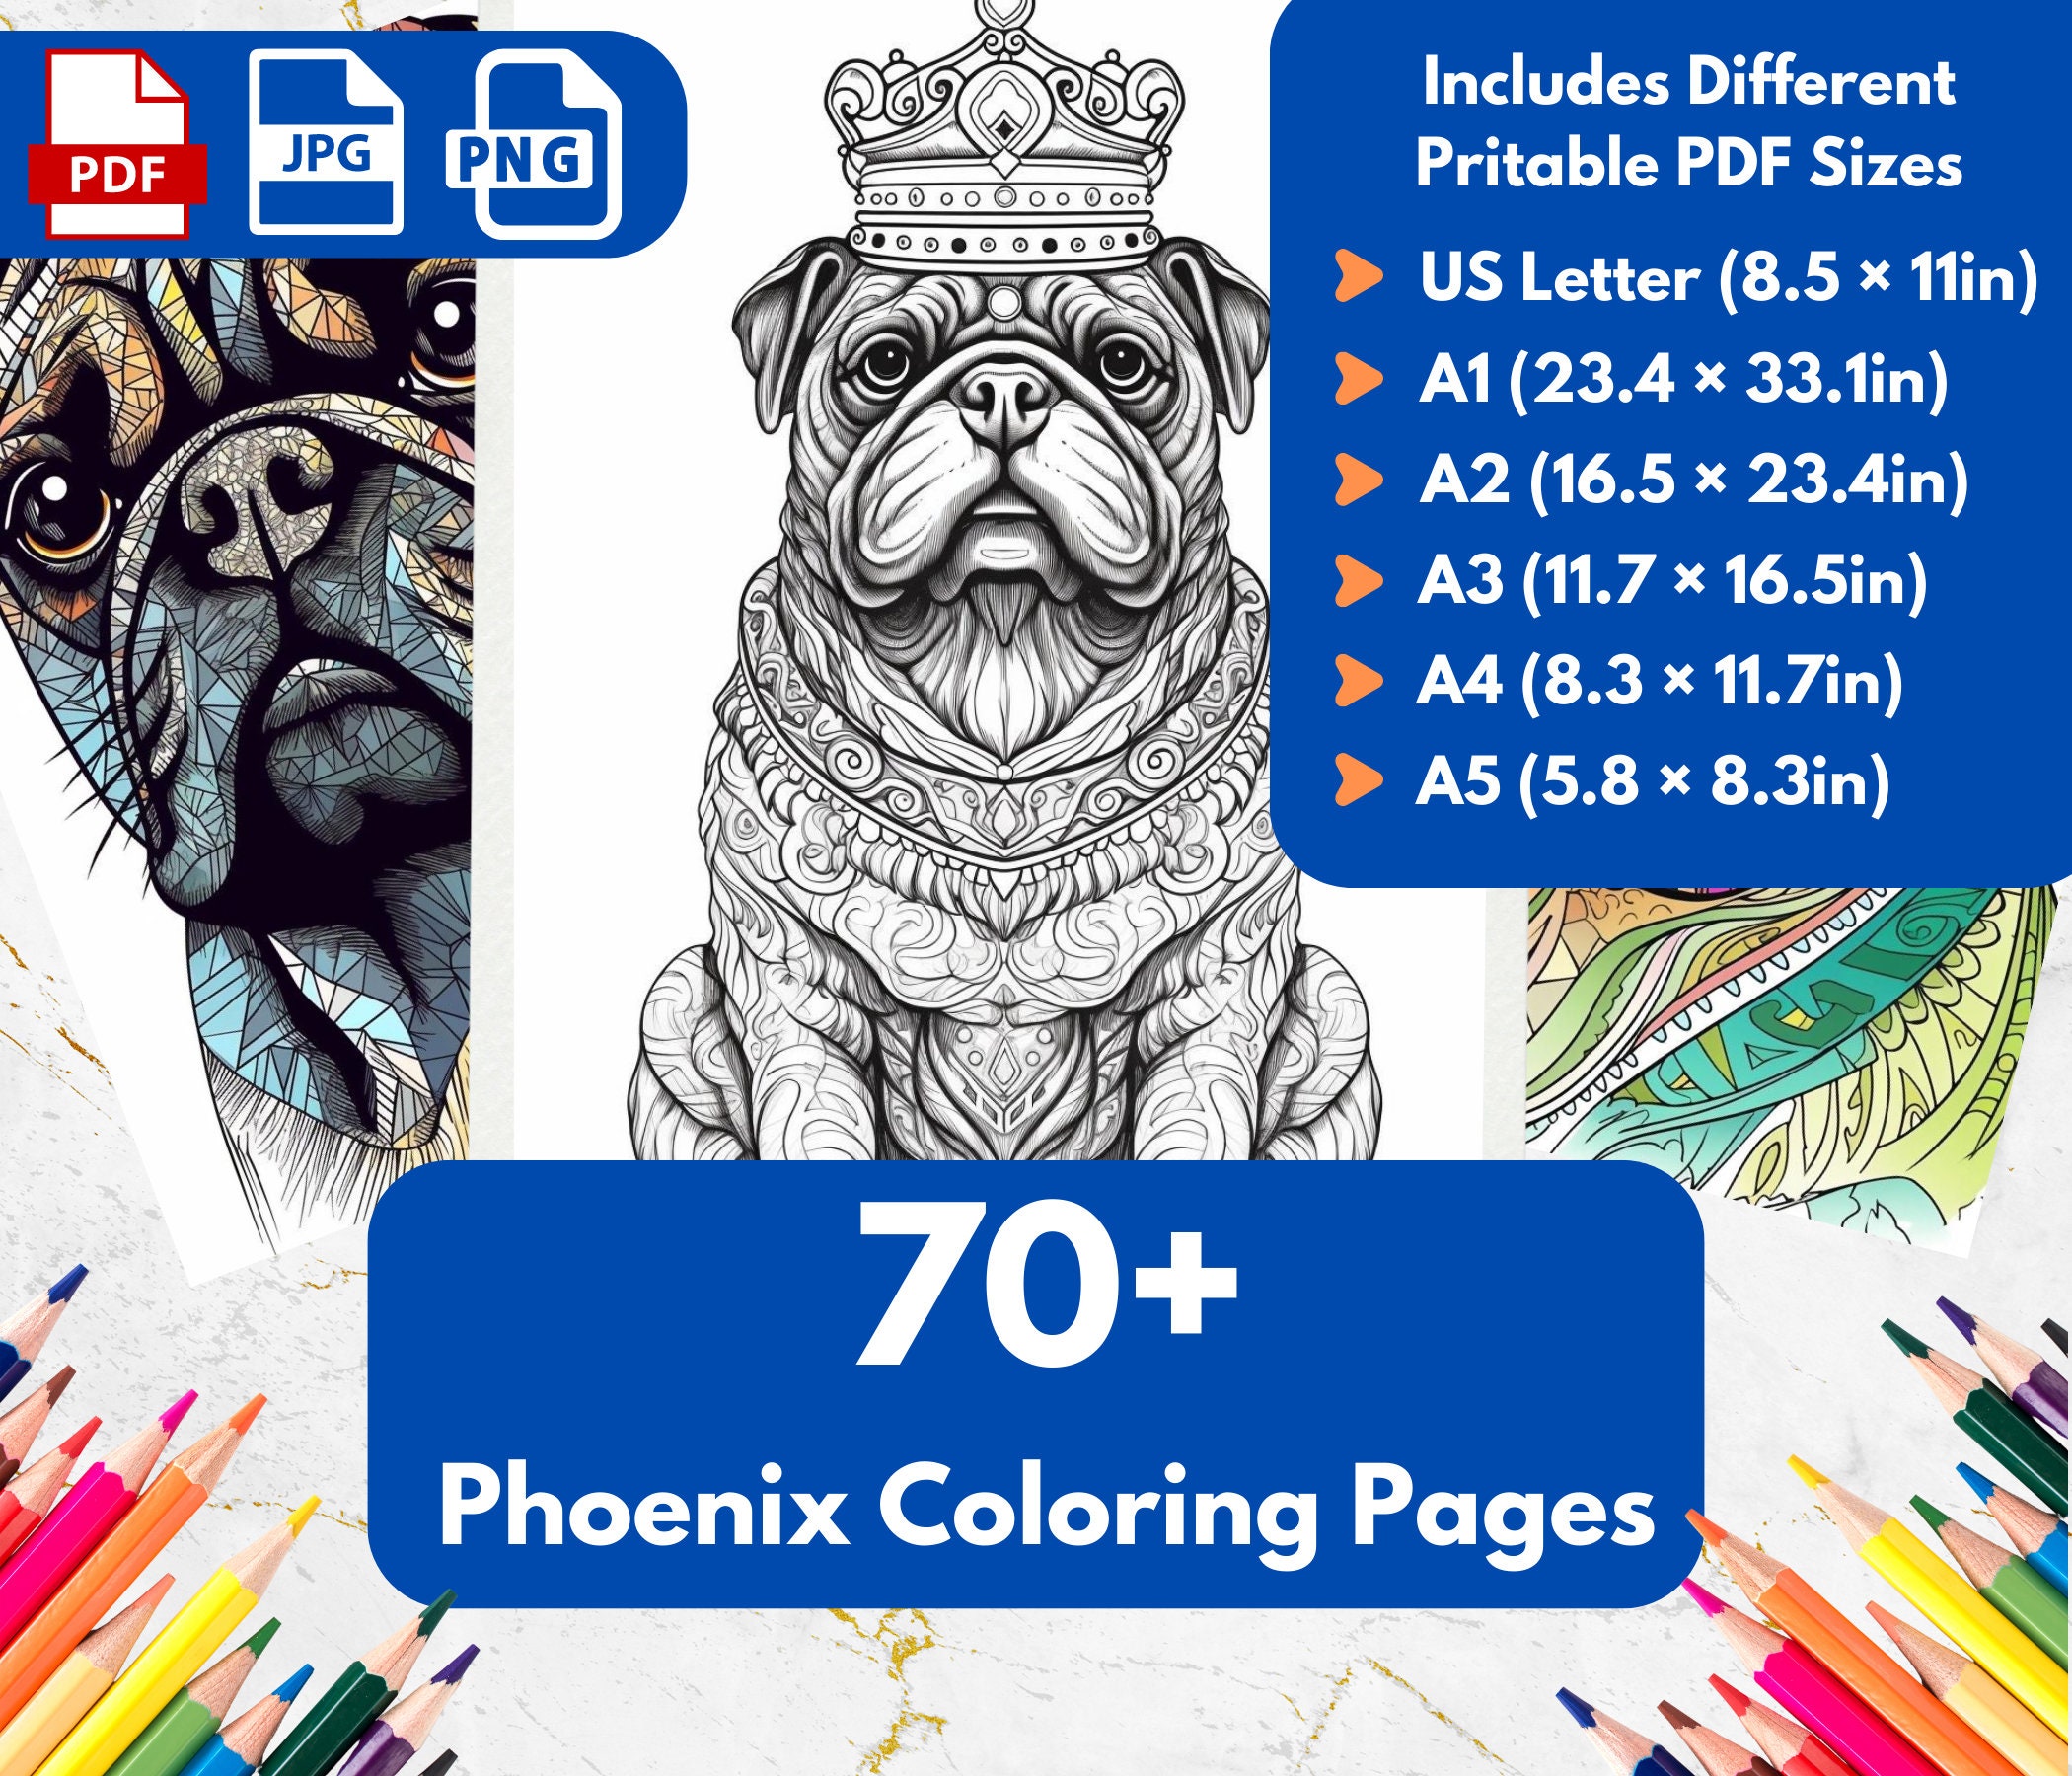 PJ Pug a Pillar from Poppy Playtime Chapter 2 Coloring Book: New Original PJ  Pug a Pillar Coloring Book - Poppy Playtime characters , Easy Coloring For  Kids, Boys, Girls, Toddlers by